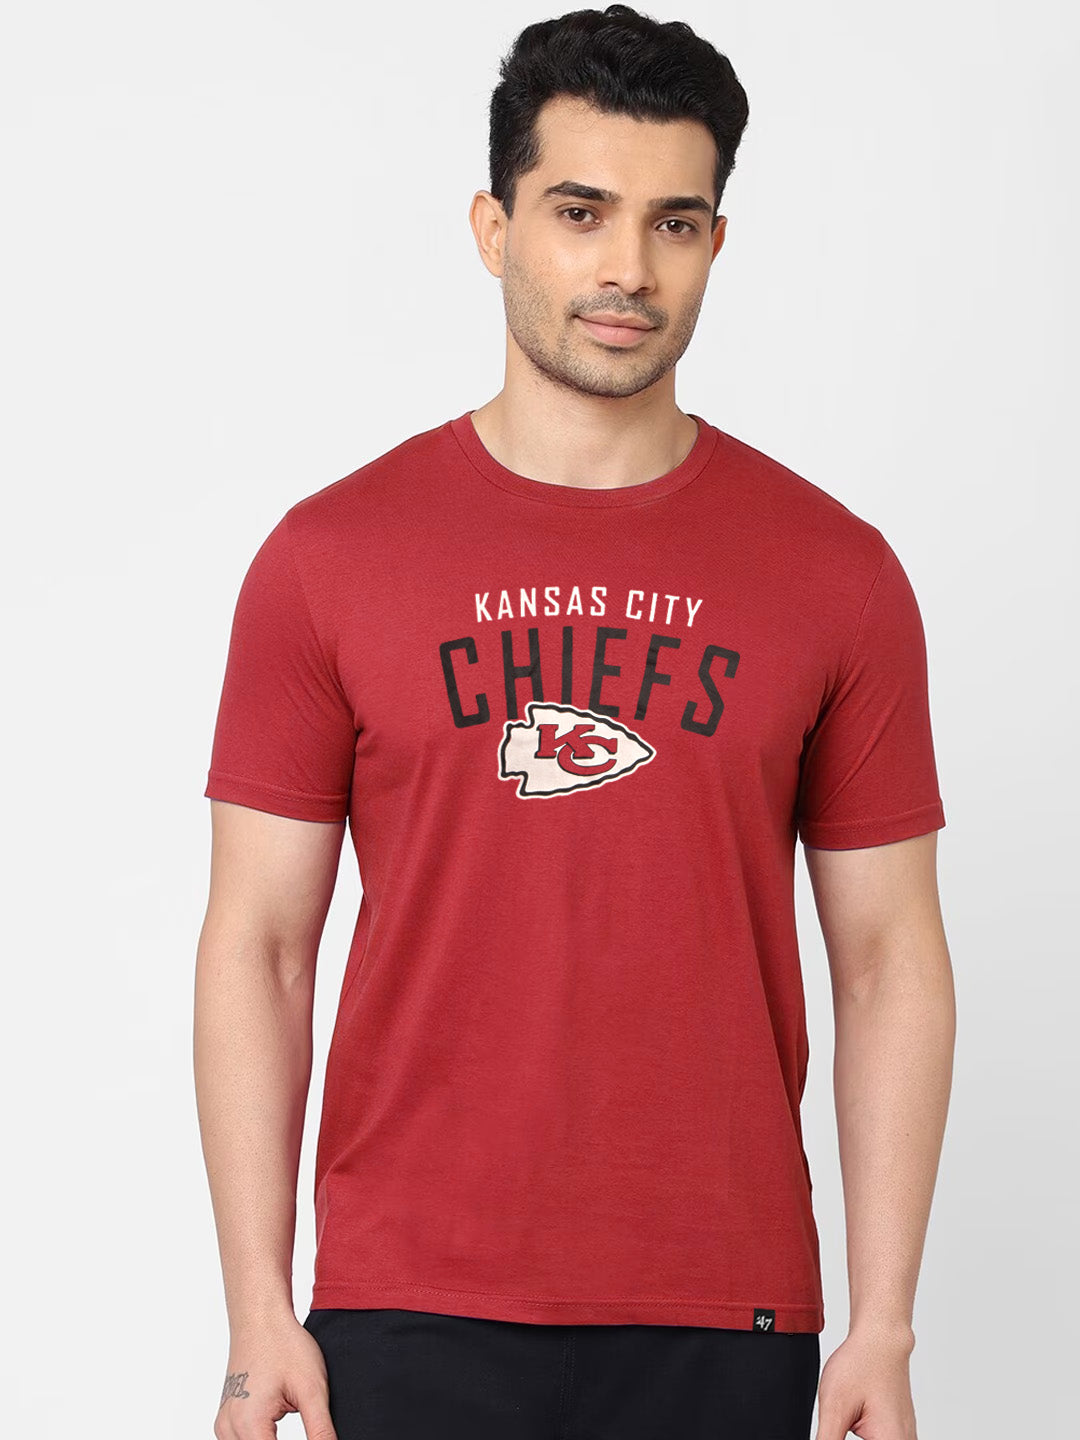 47 Single Jersey Crew Neck Tee Shirt For Men-Red with Print-BE1026